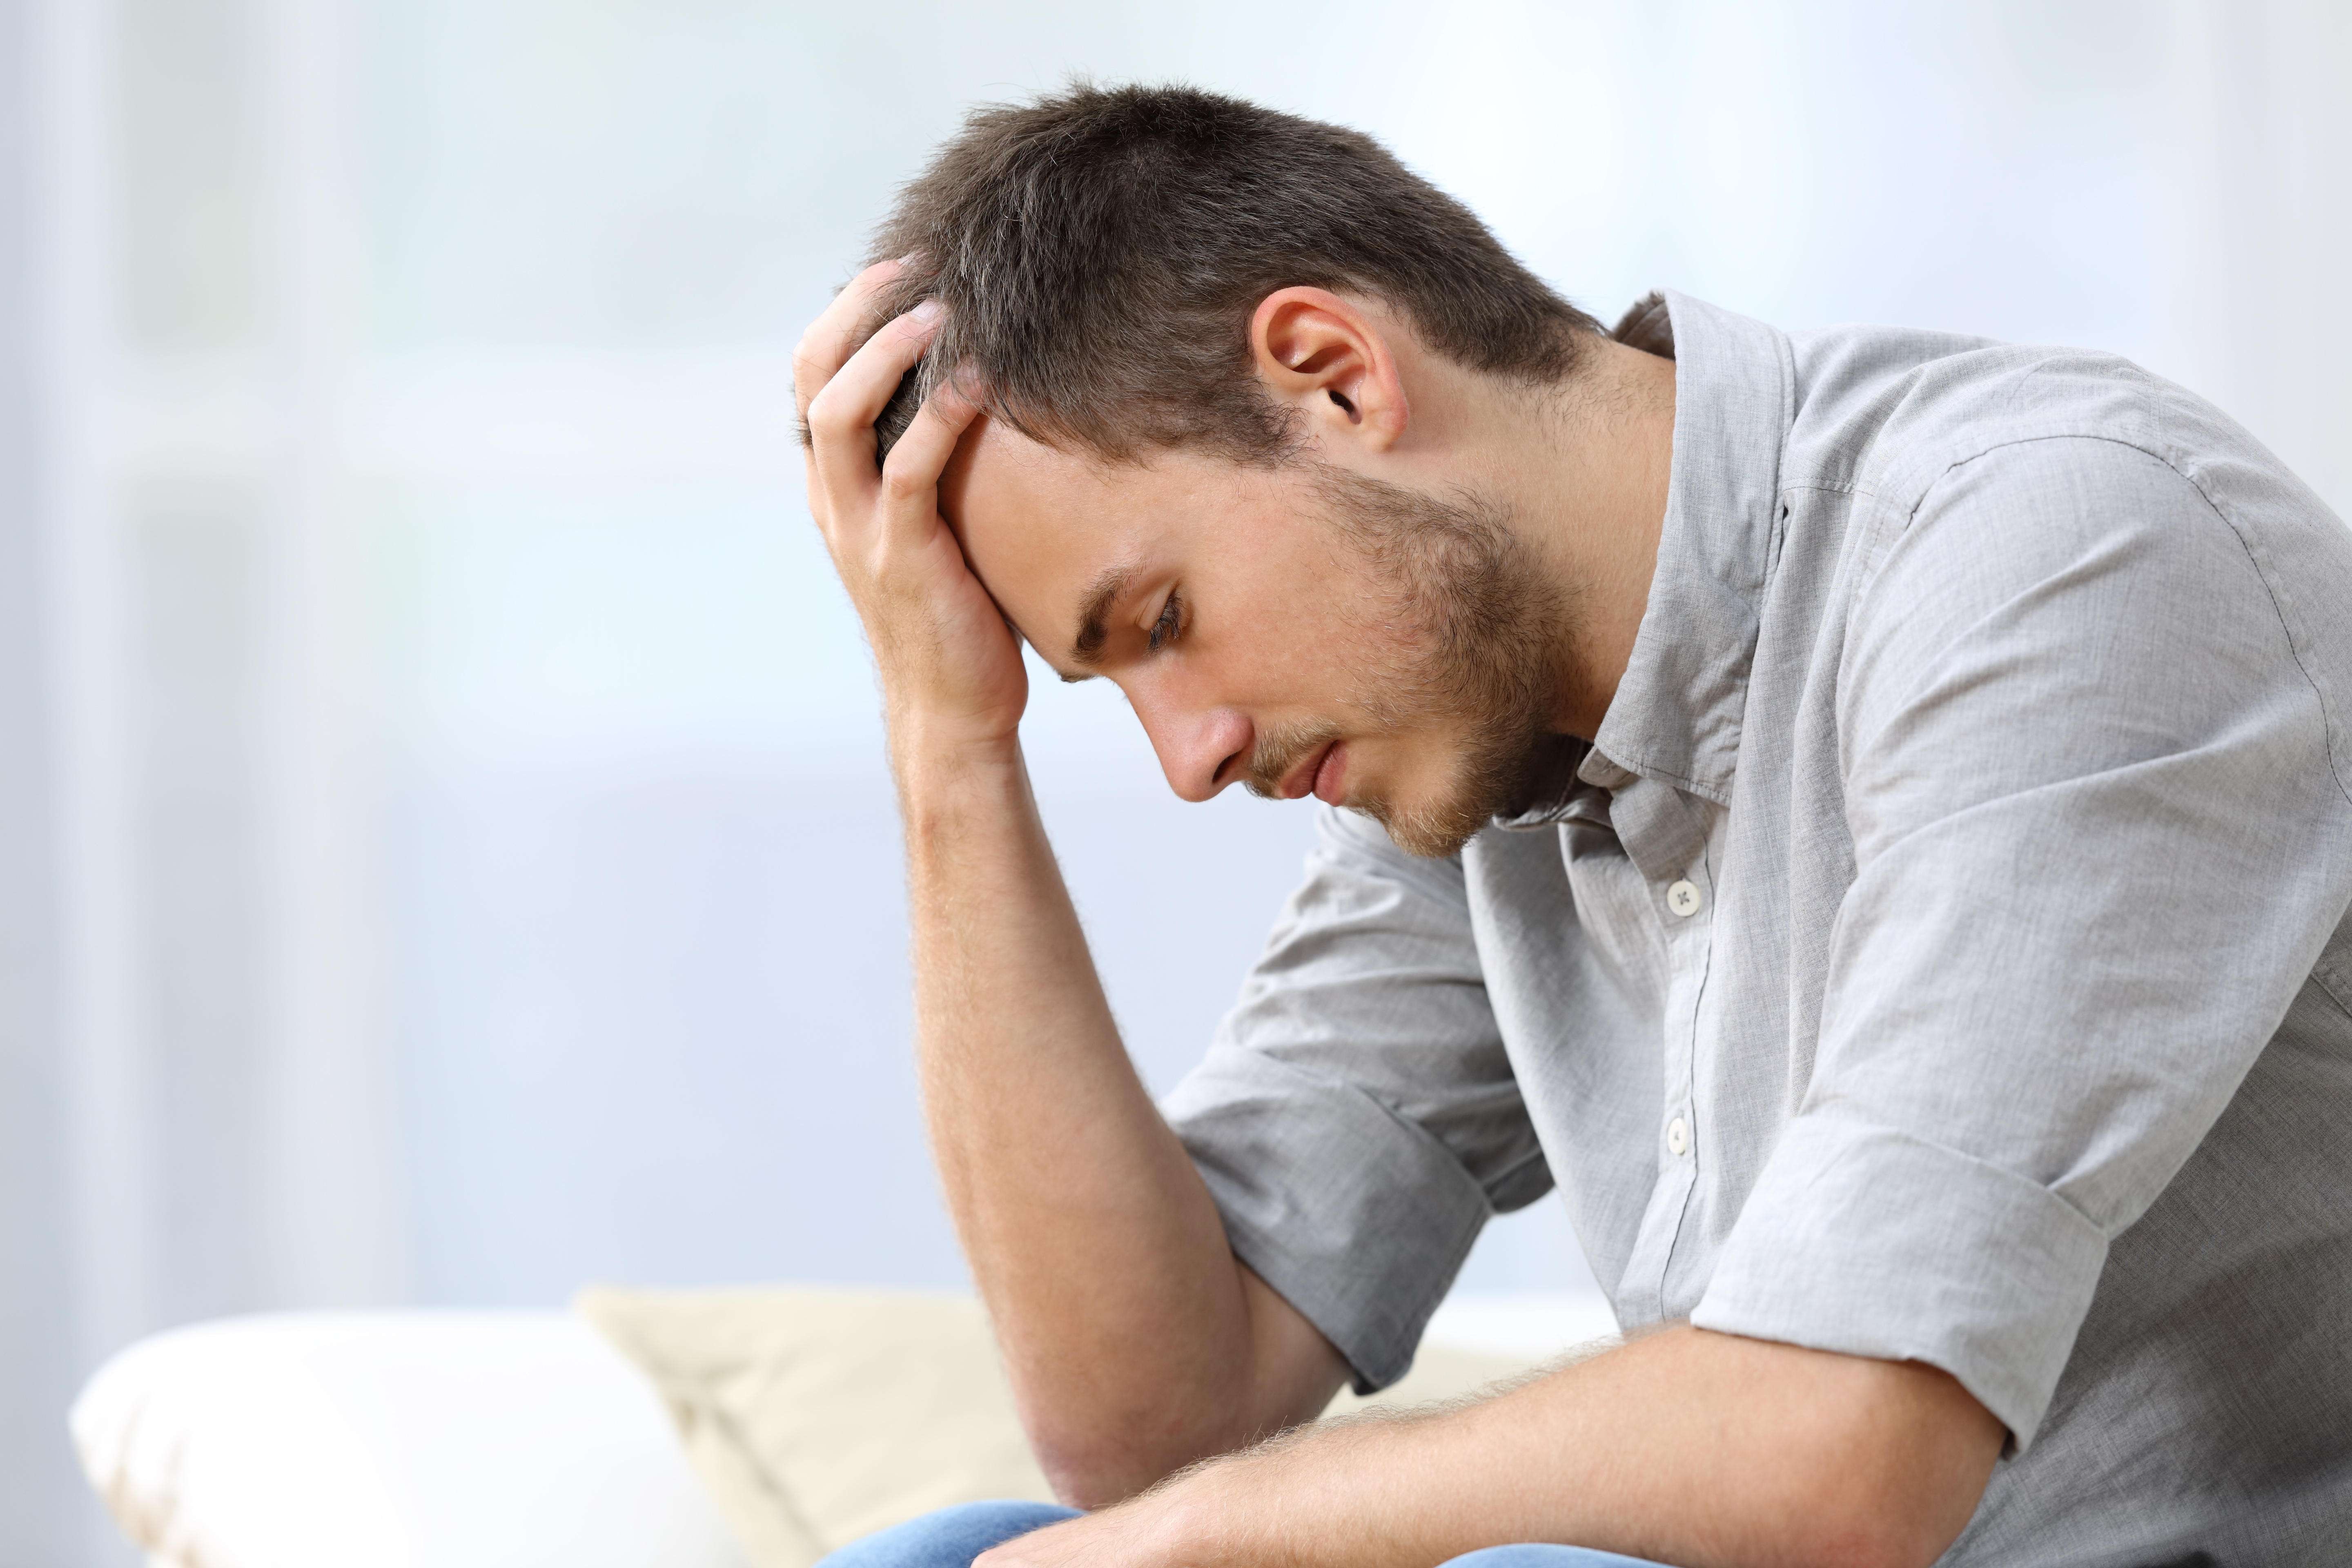 A man looking stressed | Source: Shutterstock